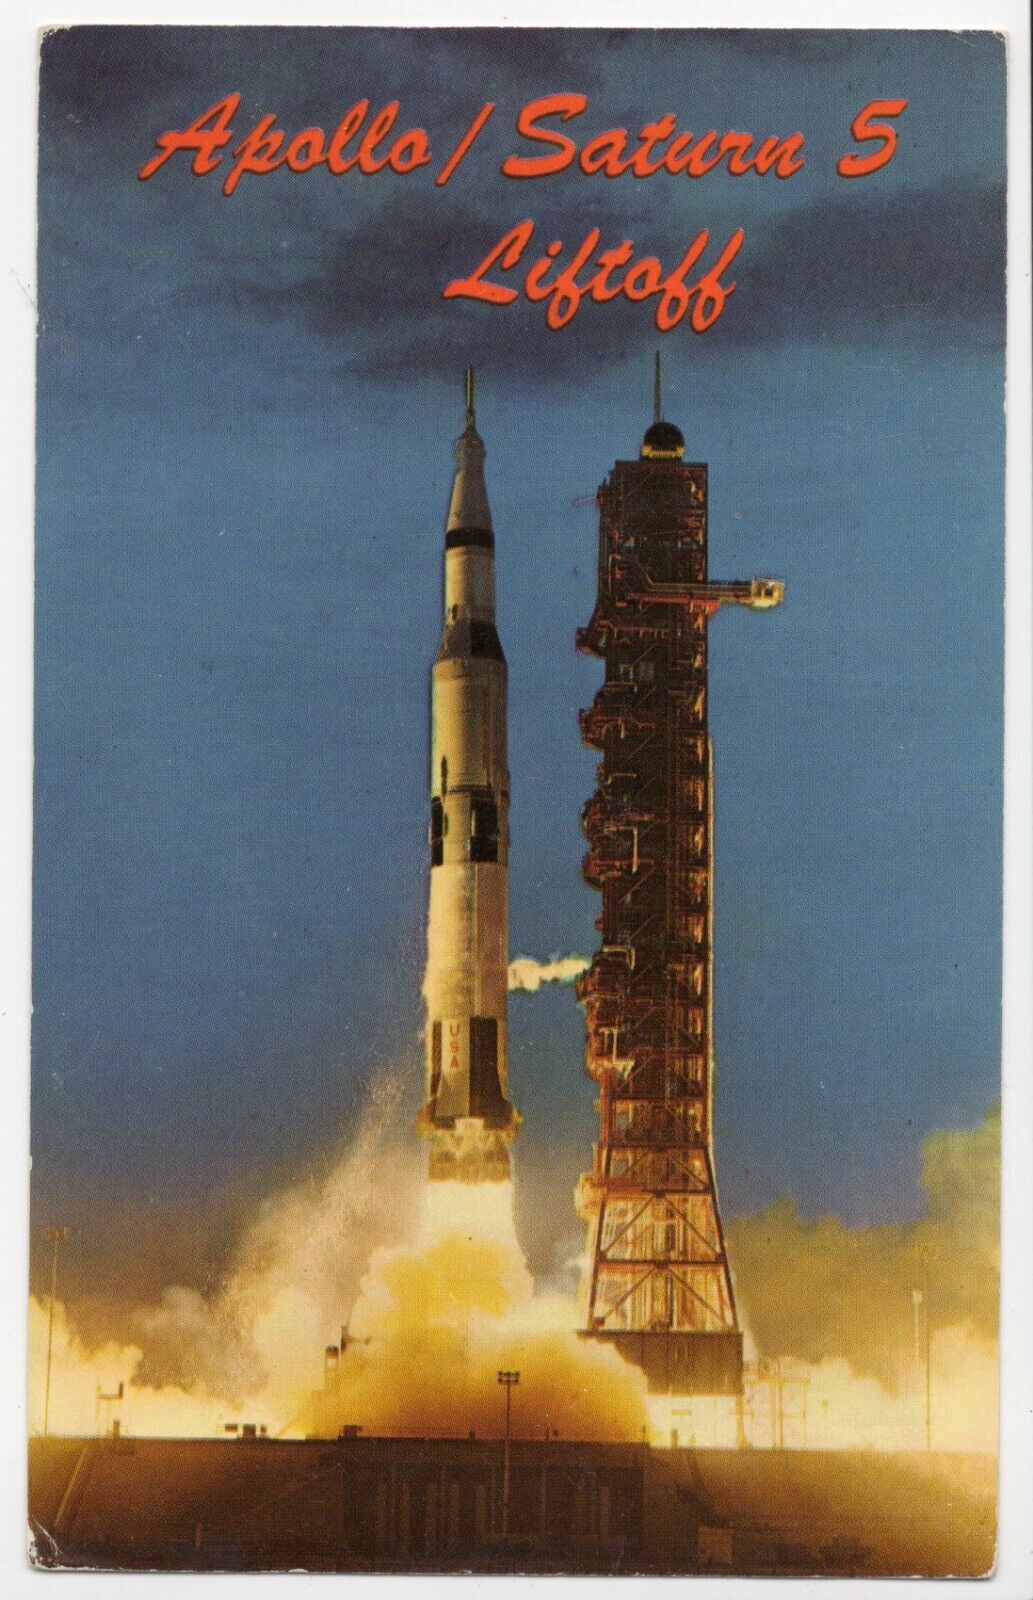 Apollo / Saturn V Space Vehicle Launch Kennedy Space Center Chrome Postcard